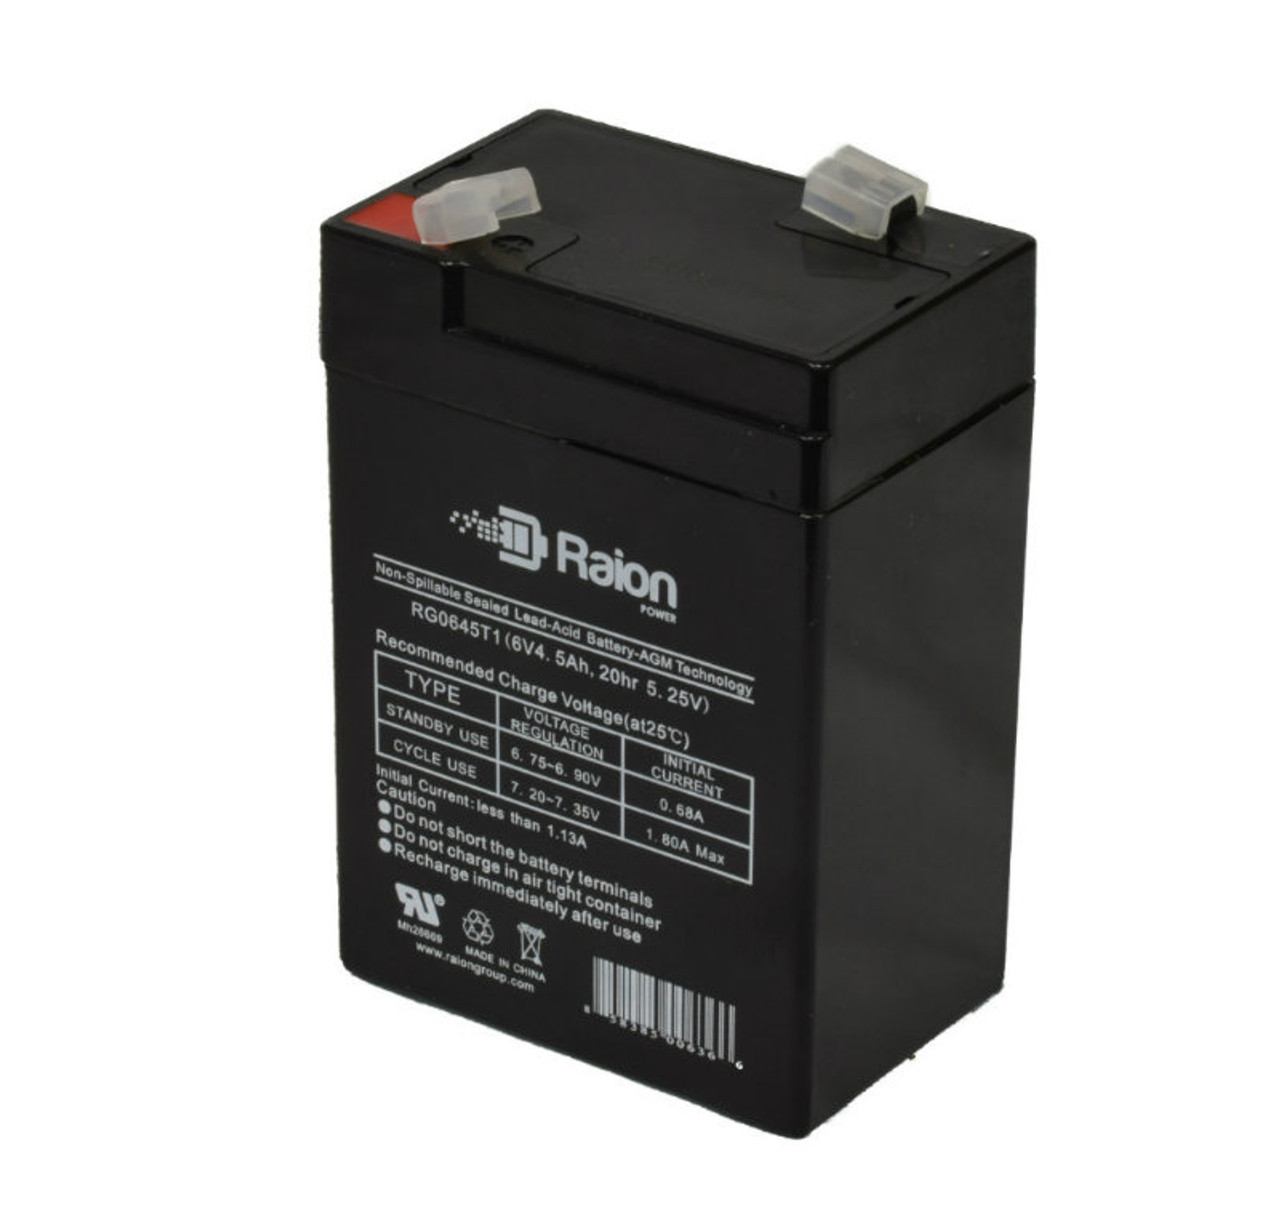 Raion Power RG0645T1 6V 4.5Ah Replacement Battery Cartridge for Sonnenschein LCR6V4P